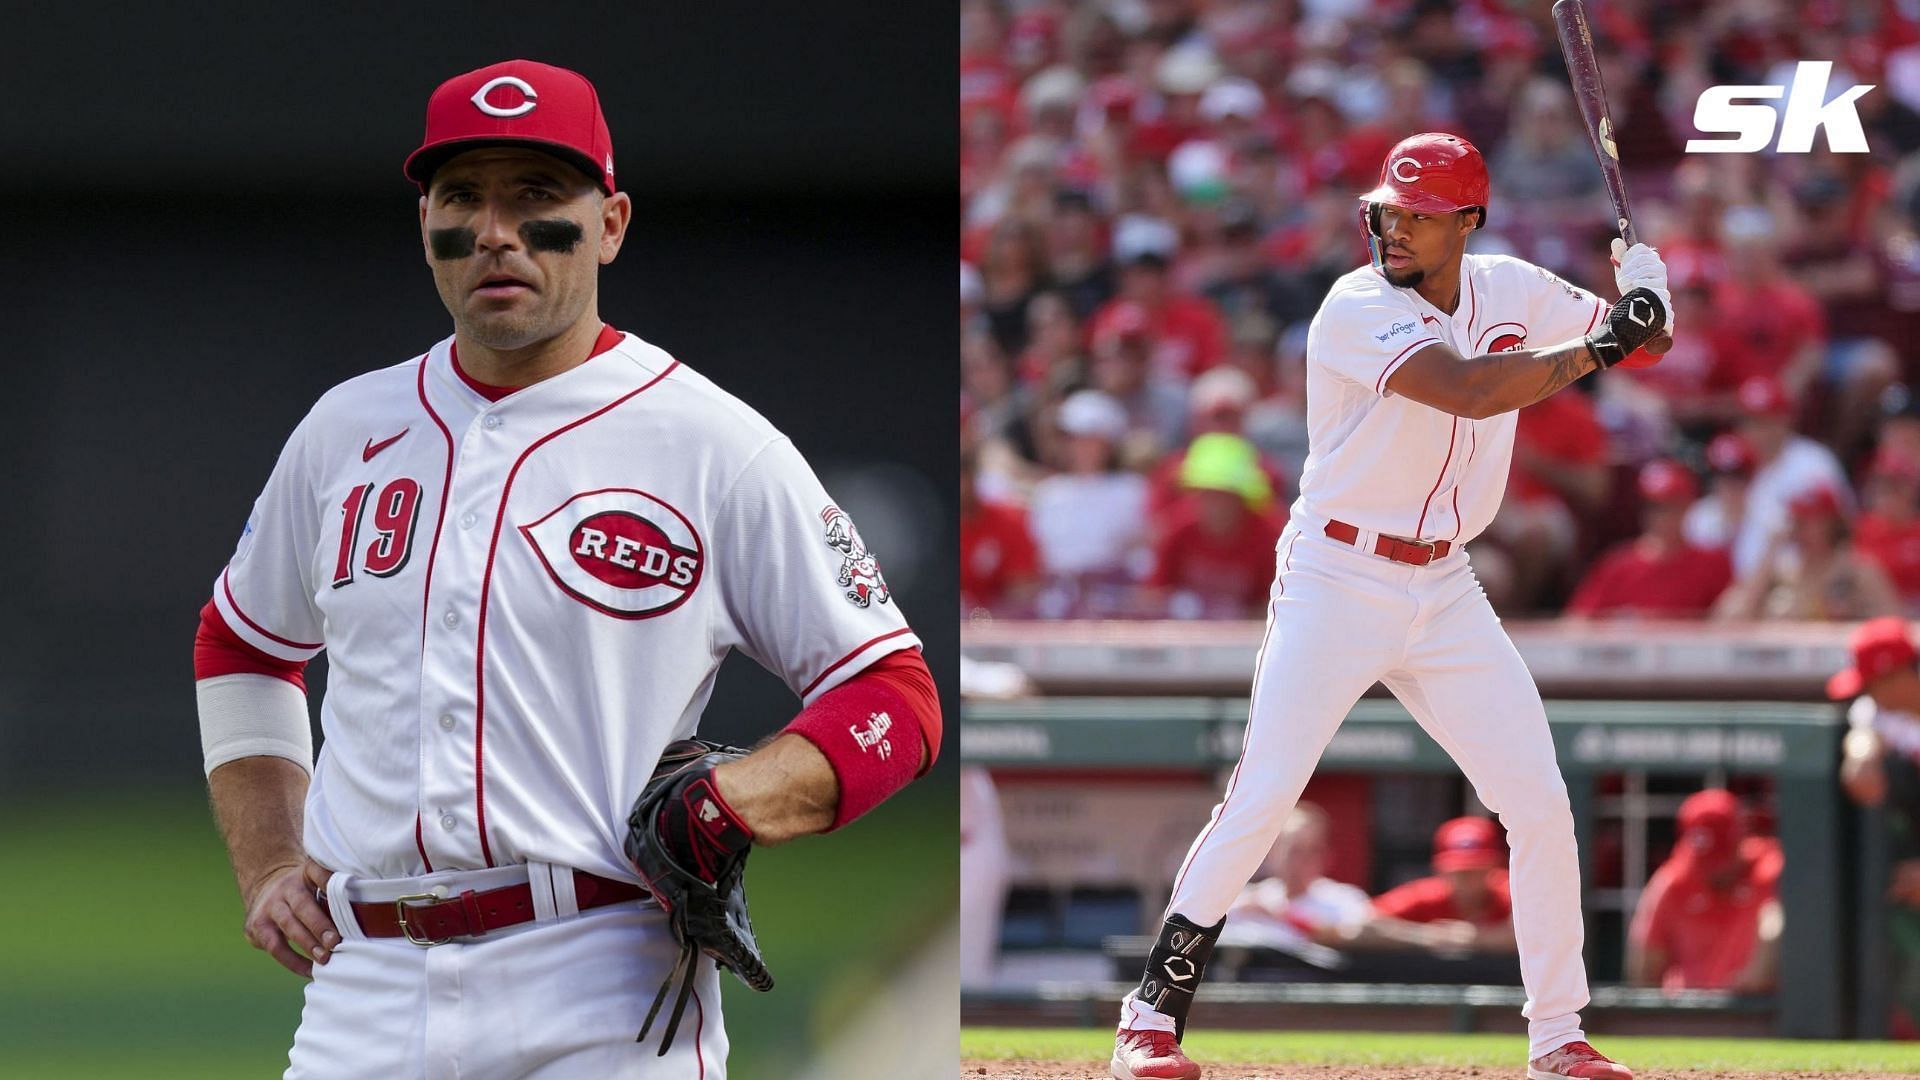 Reds outfielder Will Benson says Joey Votto helped him adjust to the MLB level